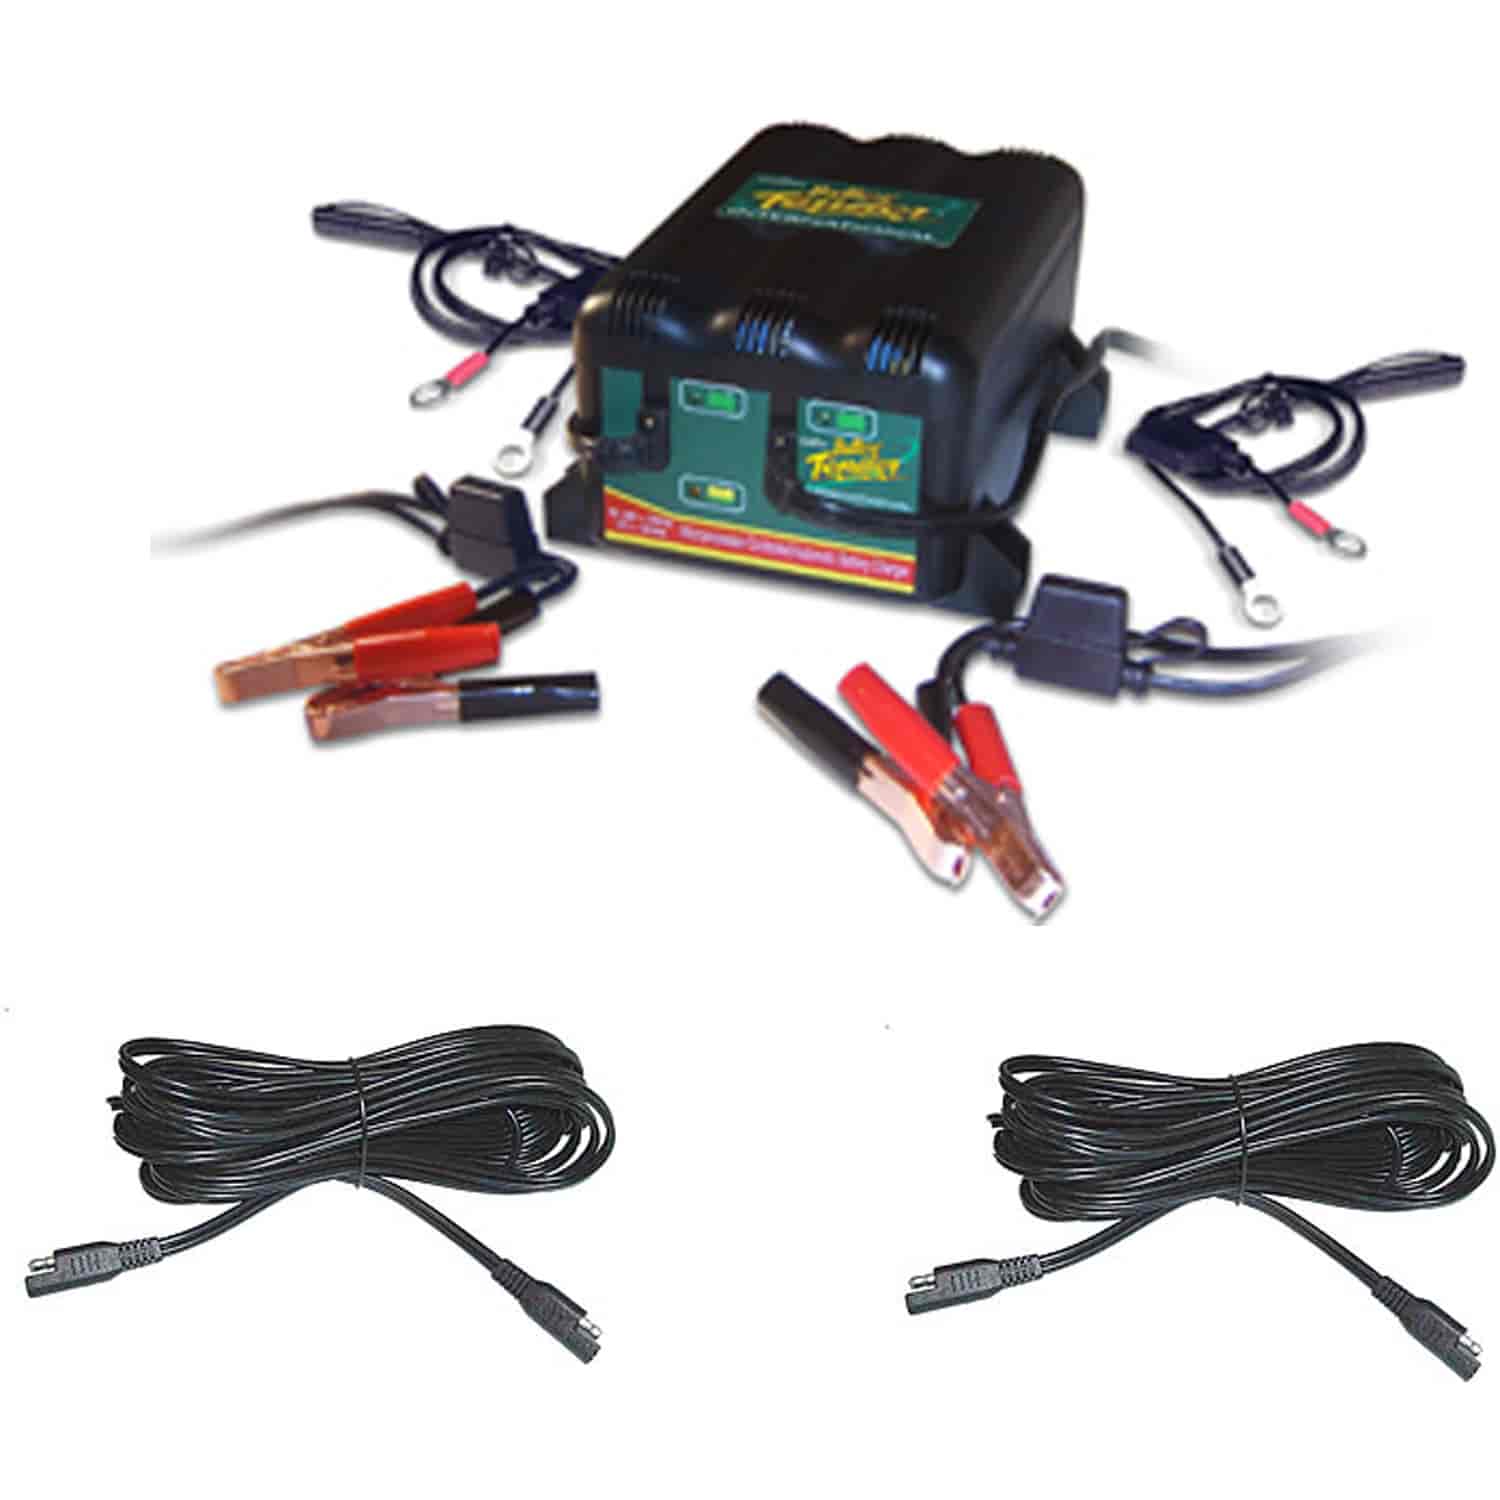 2-Bank Battery Charger and Extension Kit